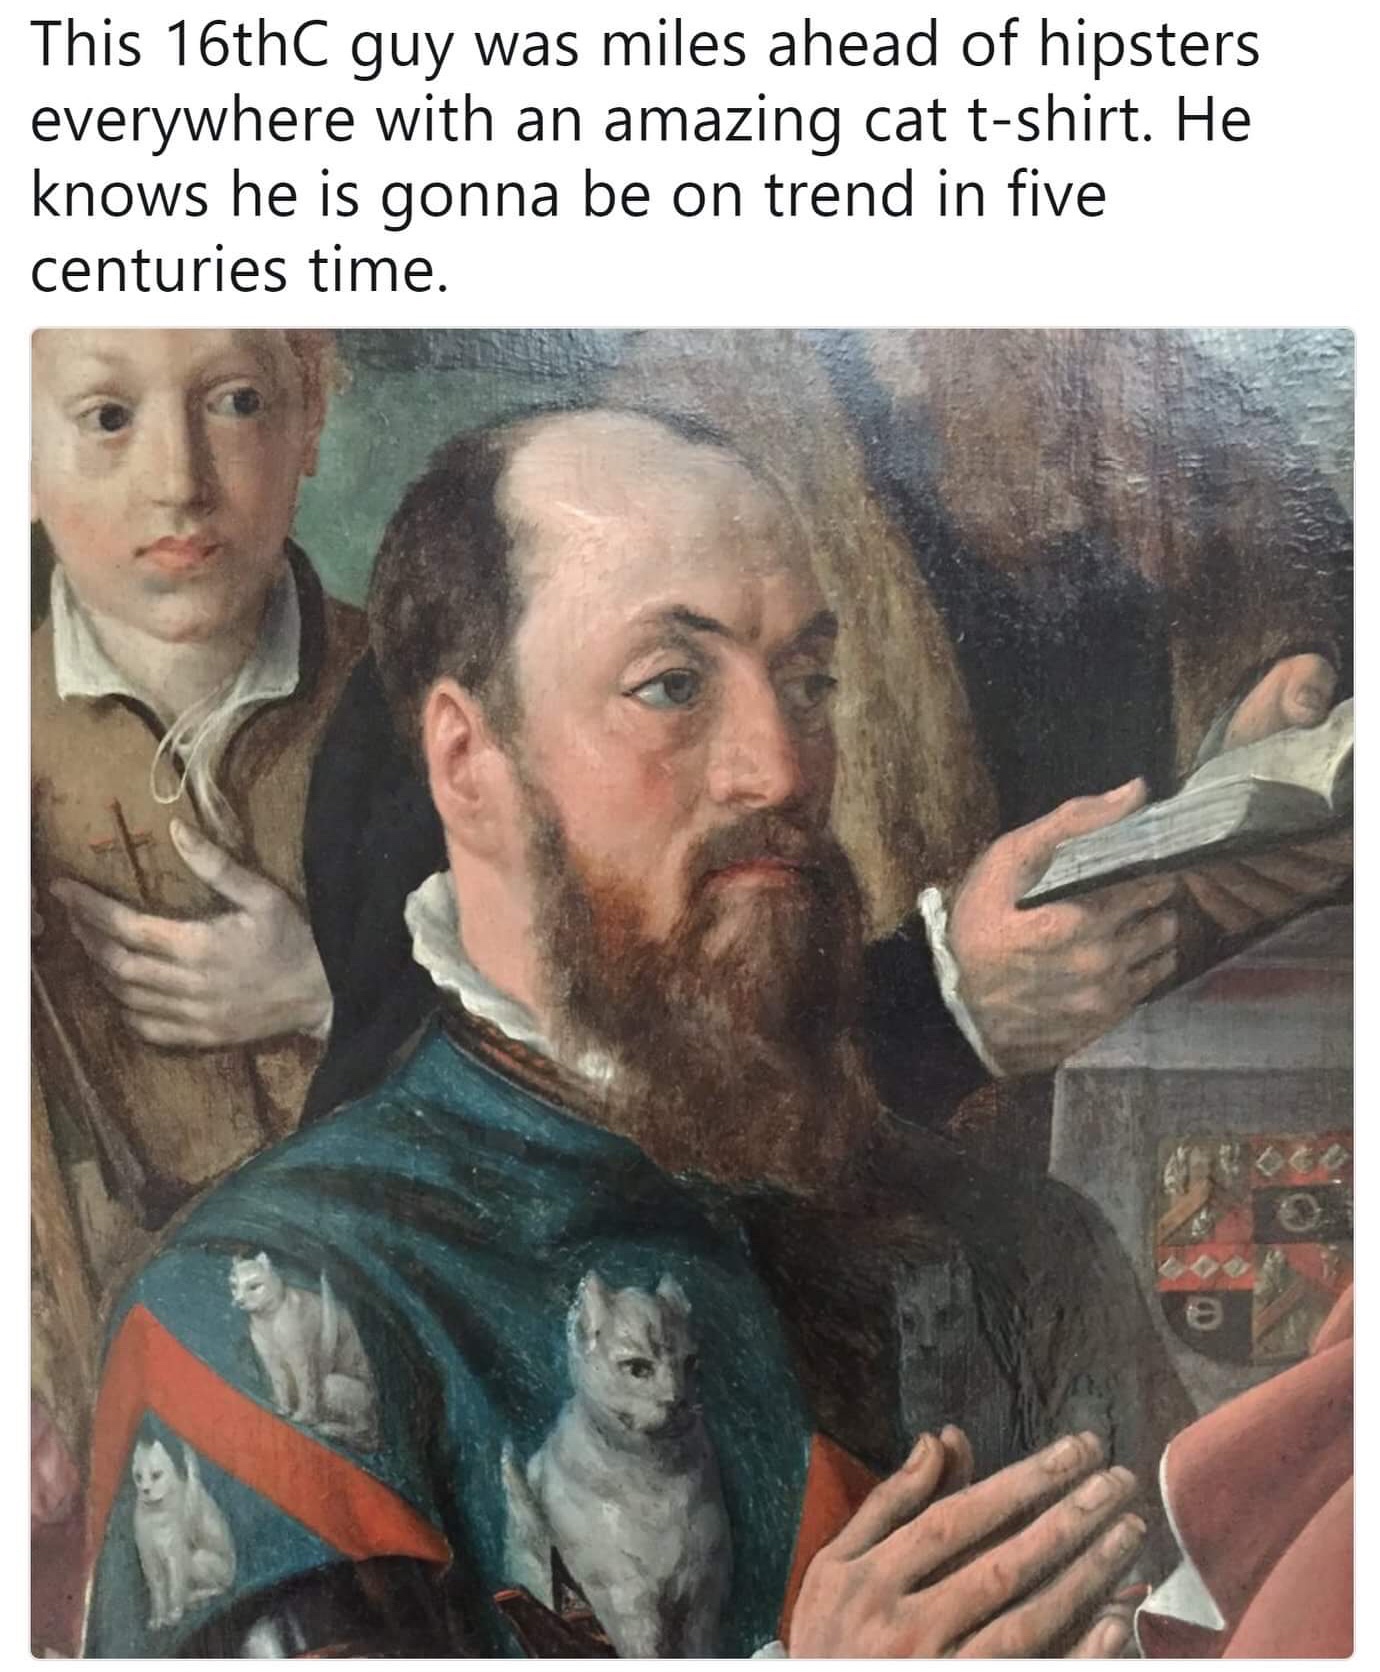 meme - got modern day - This 16th guy was miles ahead of hipsters everywhere with an amazing cat tshirt. He knows he is gonna be on trend in five centuries time.